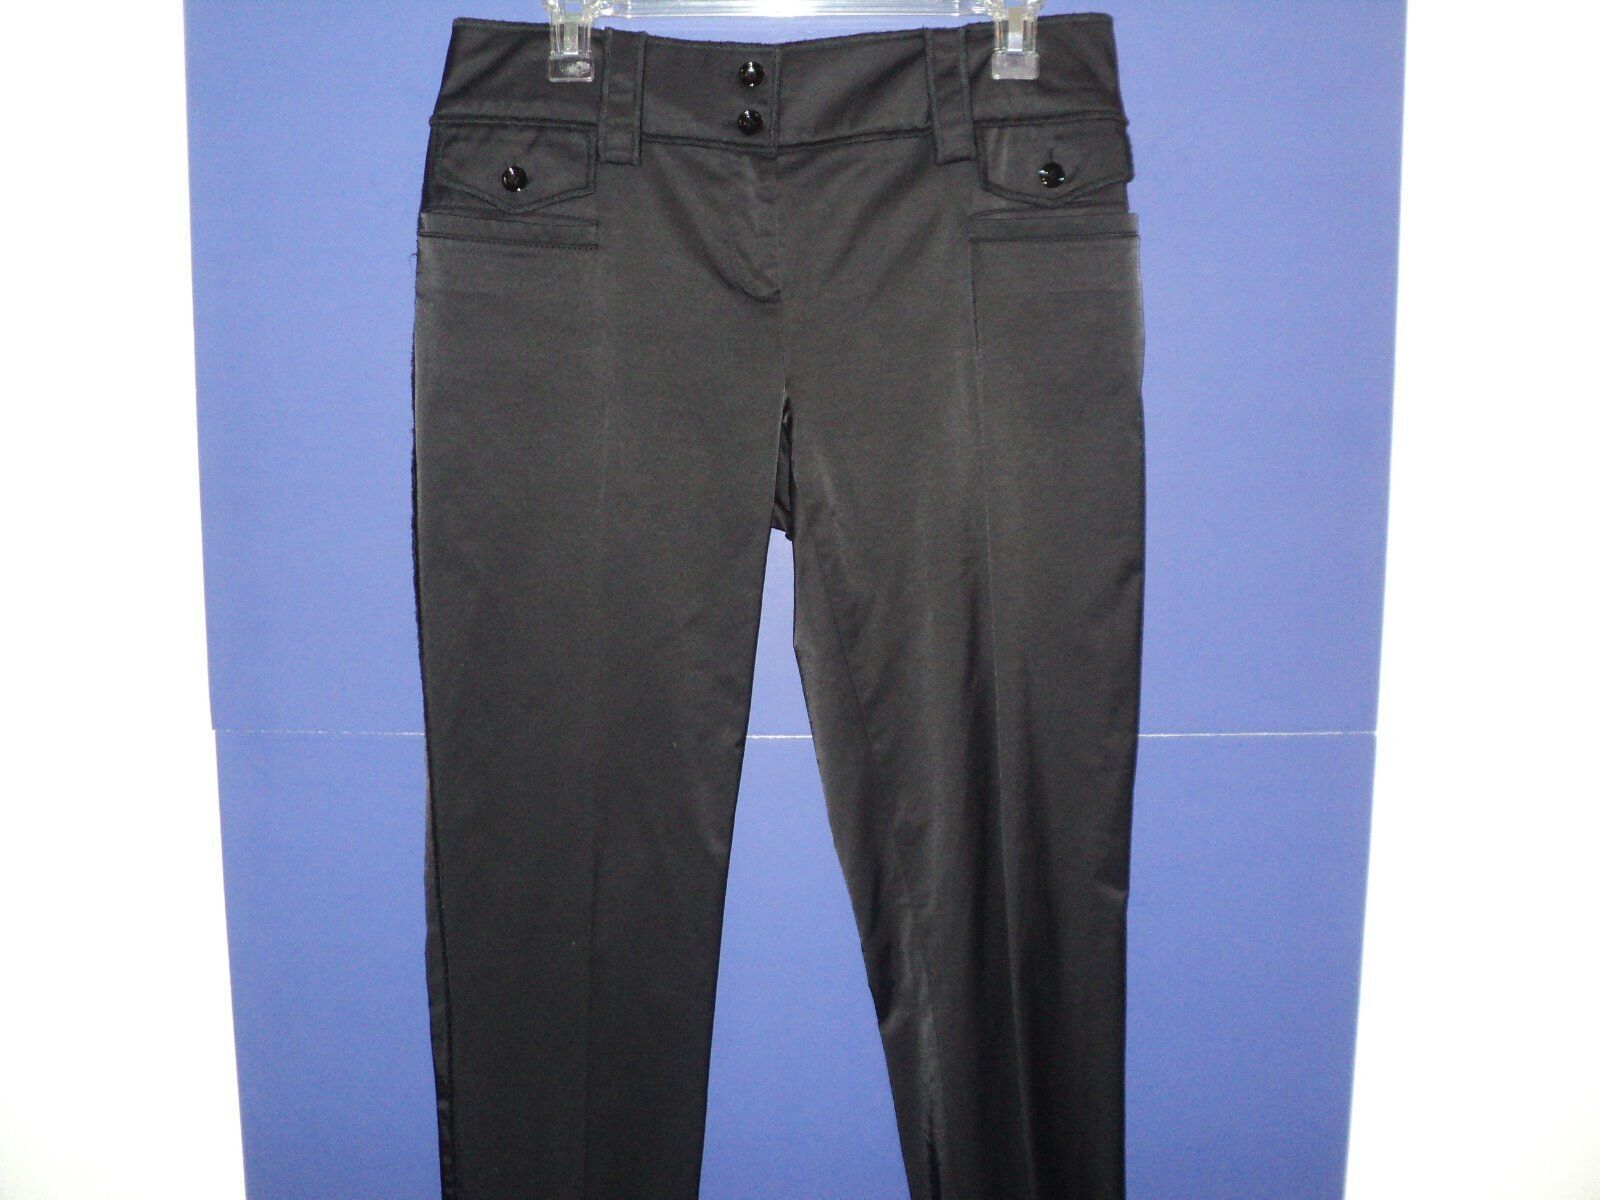 Primary image for Worth Pants Size XS Black Stretchy Cotton/Nylon w/Sheen Reverse Seams Tapered